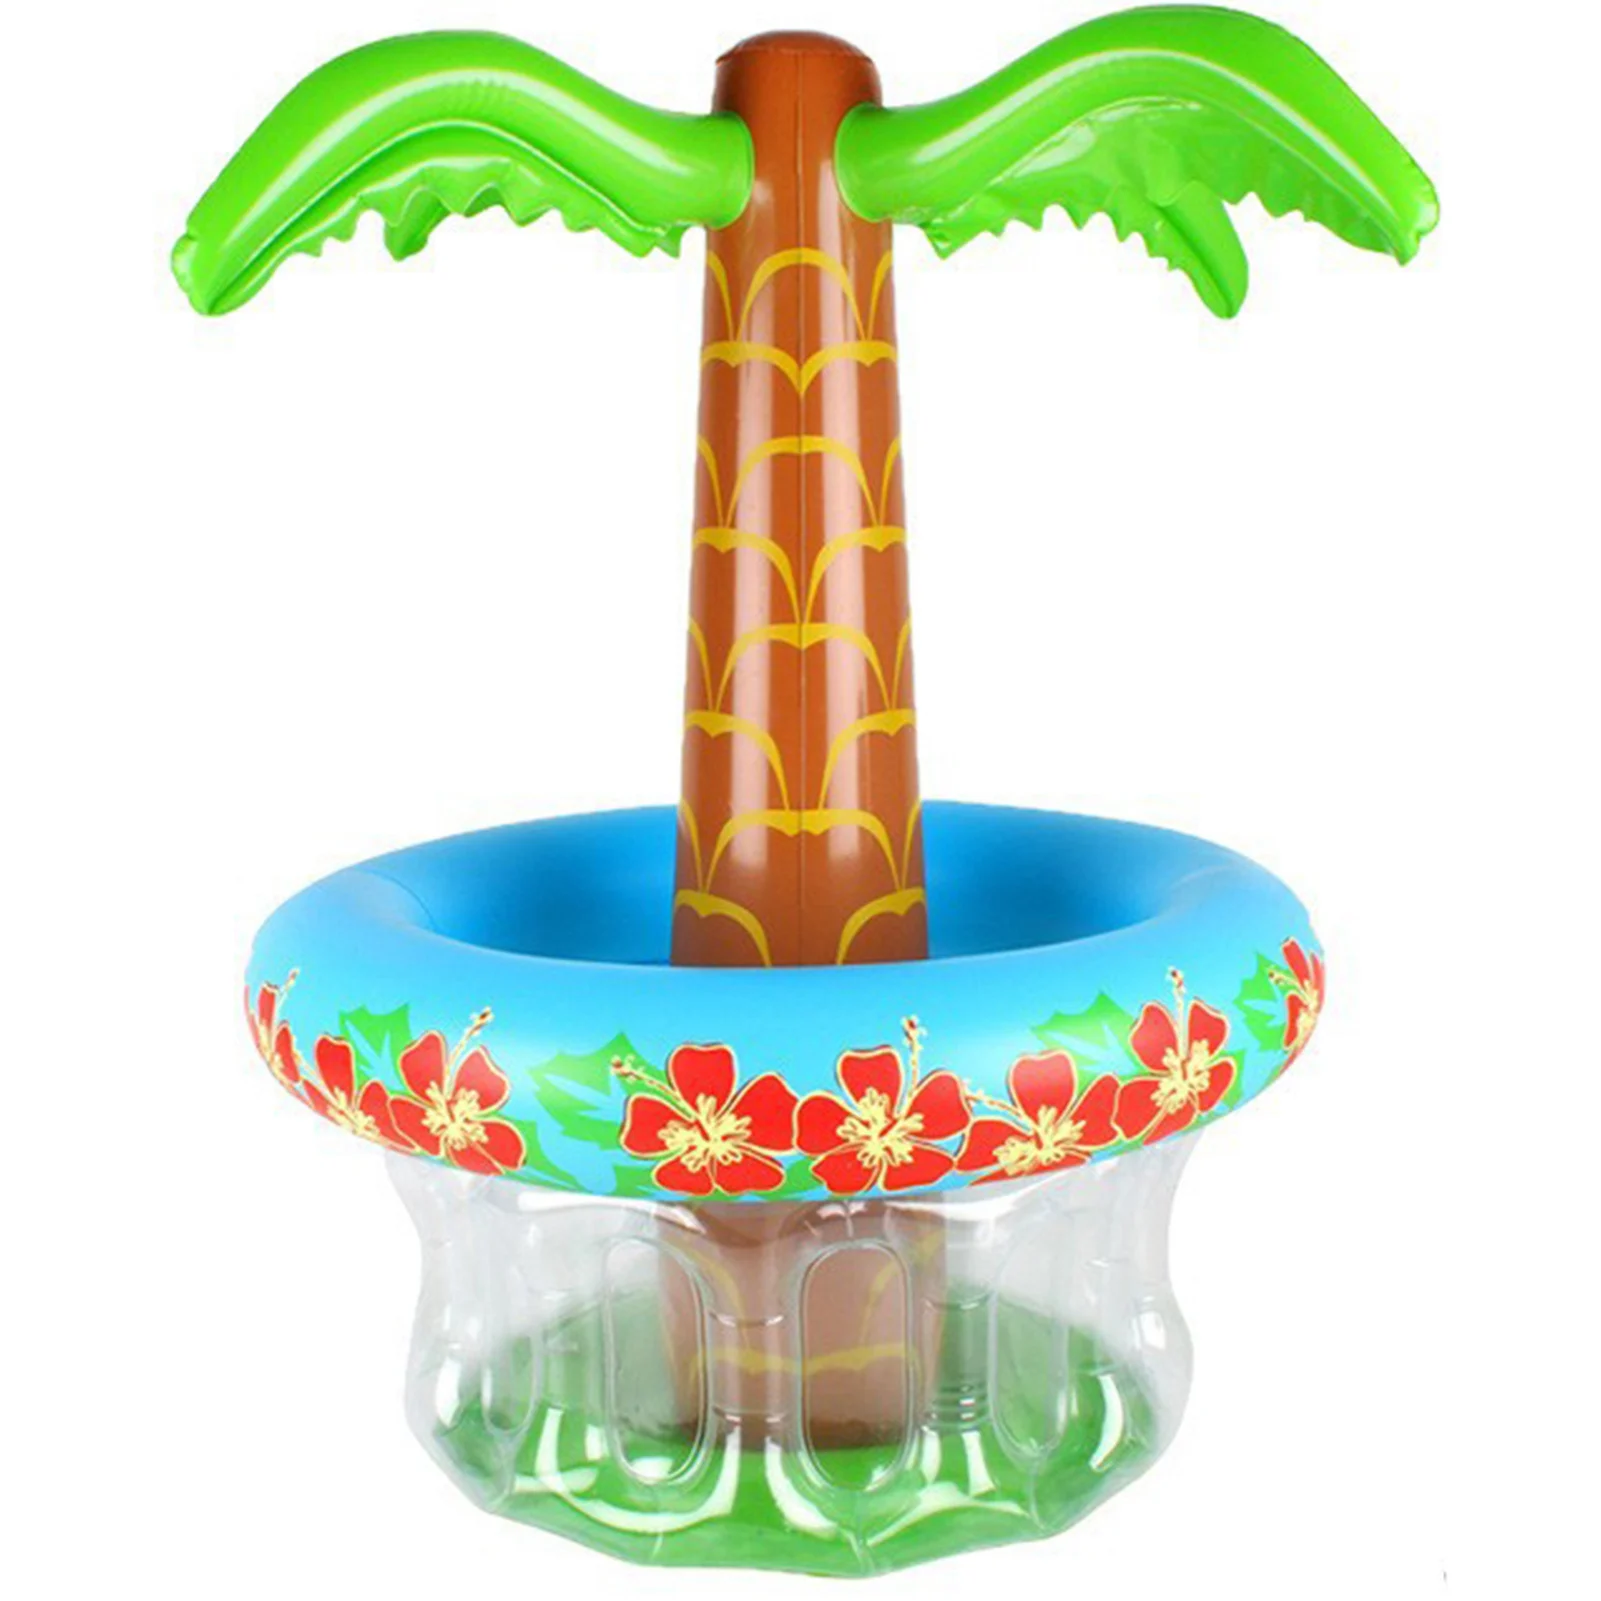 

Inflatable Palm Tree Cooler Tropical Beach Themed Party Decorations Suitable for Summer Pool Party